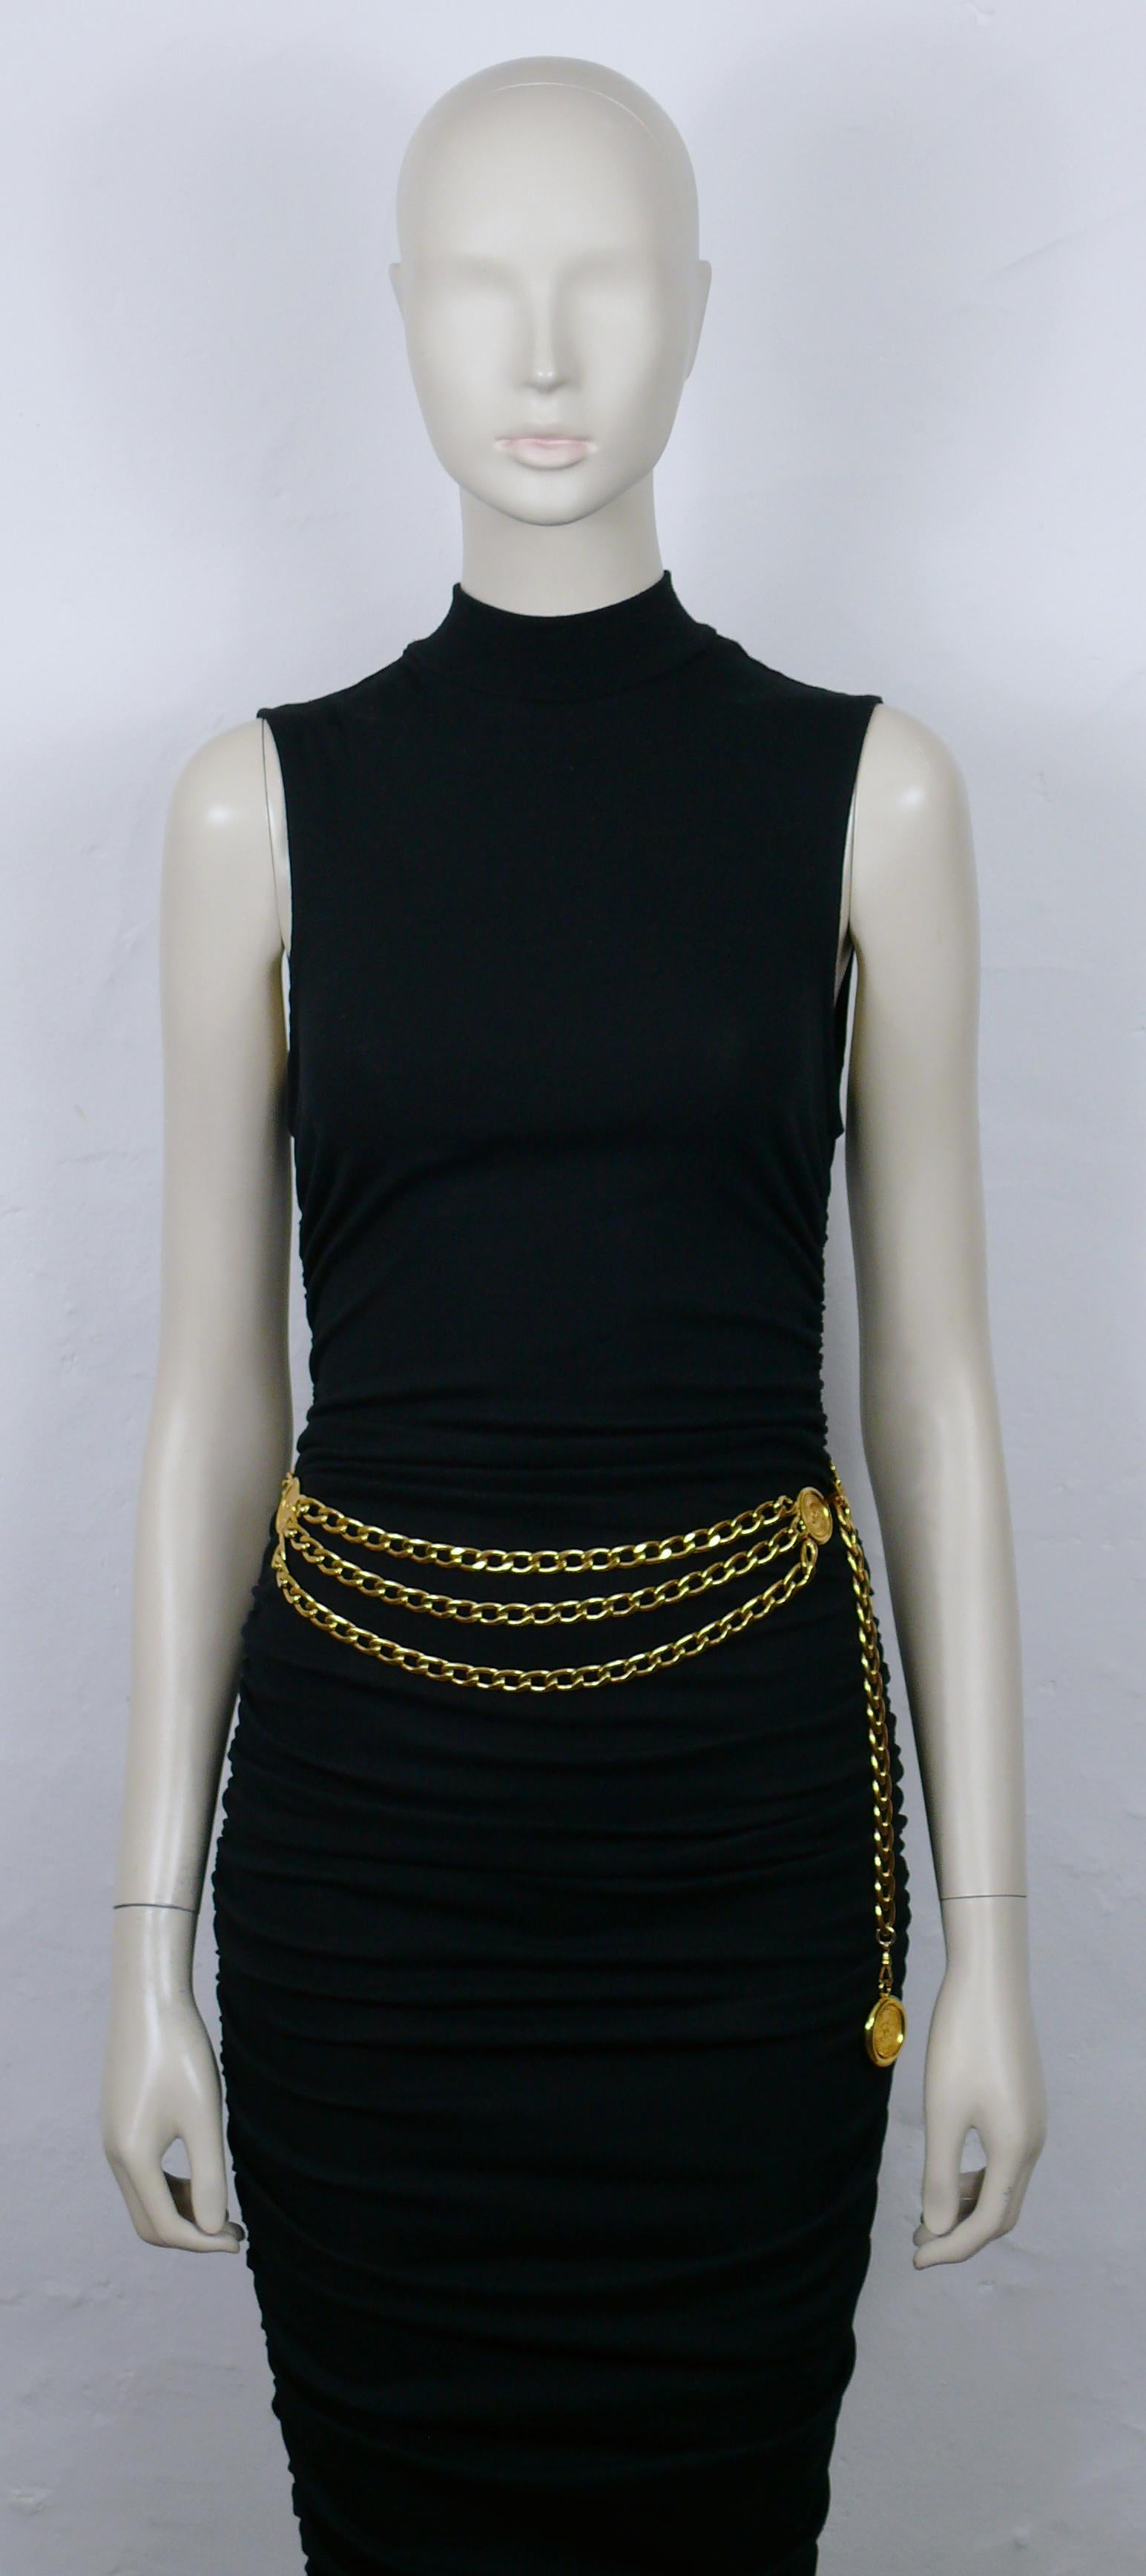 CHANEL by KARL LAGERFELD vintage gold tone chain belt featuring three Chanel 31 Rue Cambon Paris CC coins.

Adjustable hook clasp closure.

Embossed CHANEL.

Indicative measurements : max. length approx. 88 cm (34.65 inches) / link width approx. 1